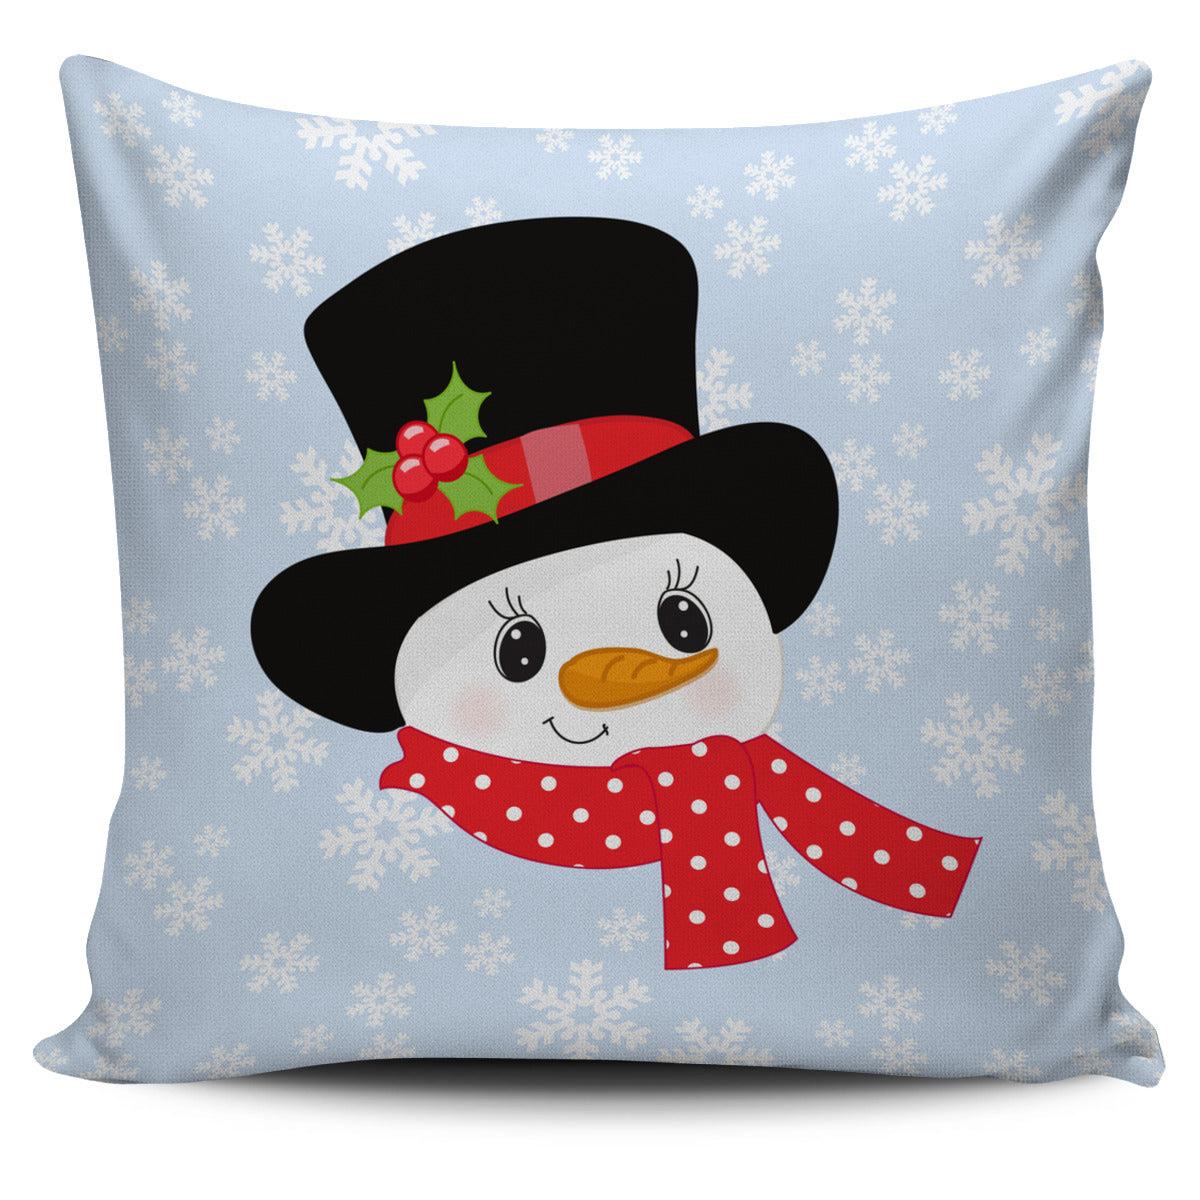 Christmas Pillow Cover with Snowman